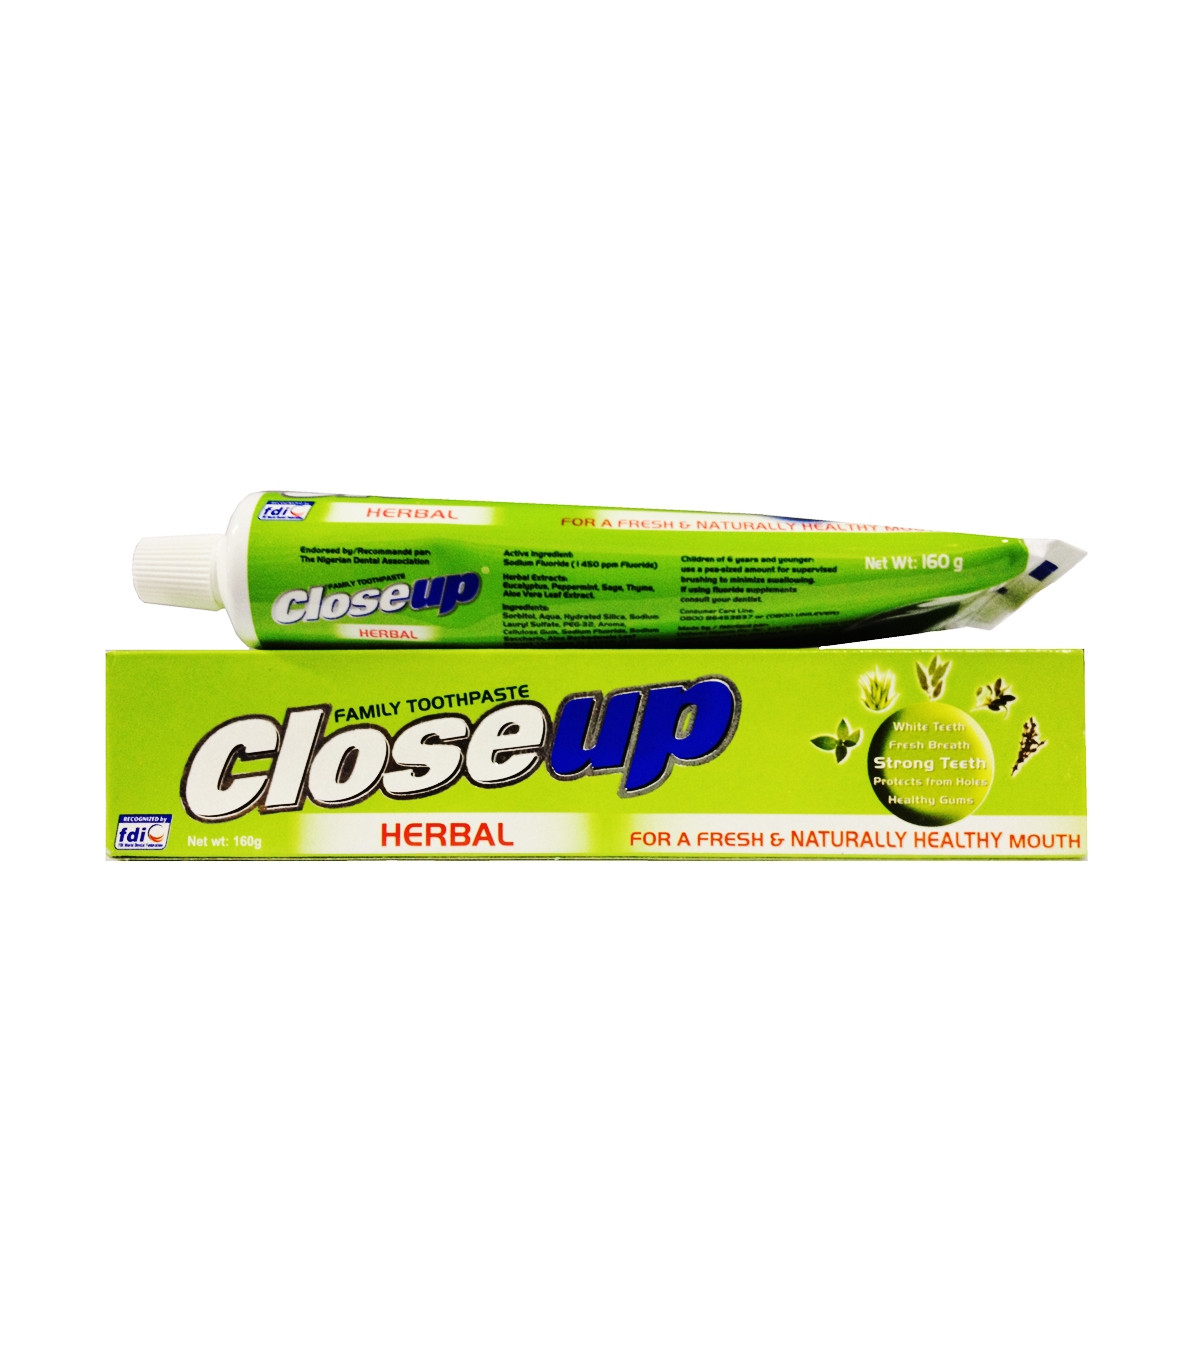 Close Up Herbal Toothpaste - 160g